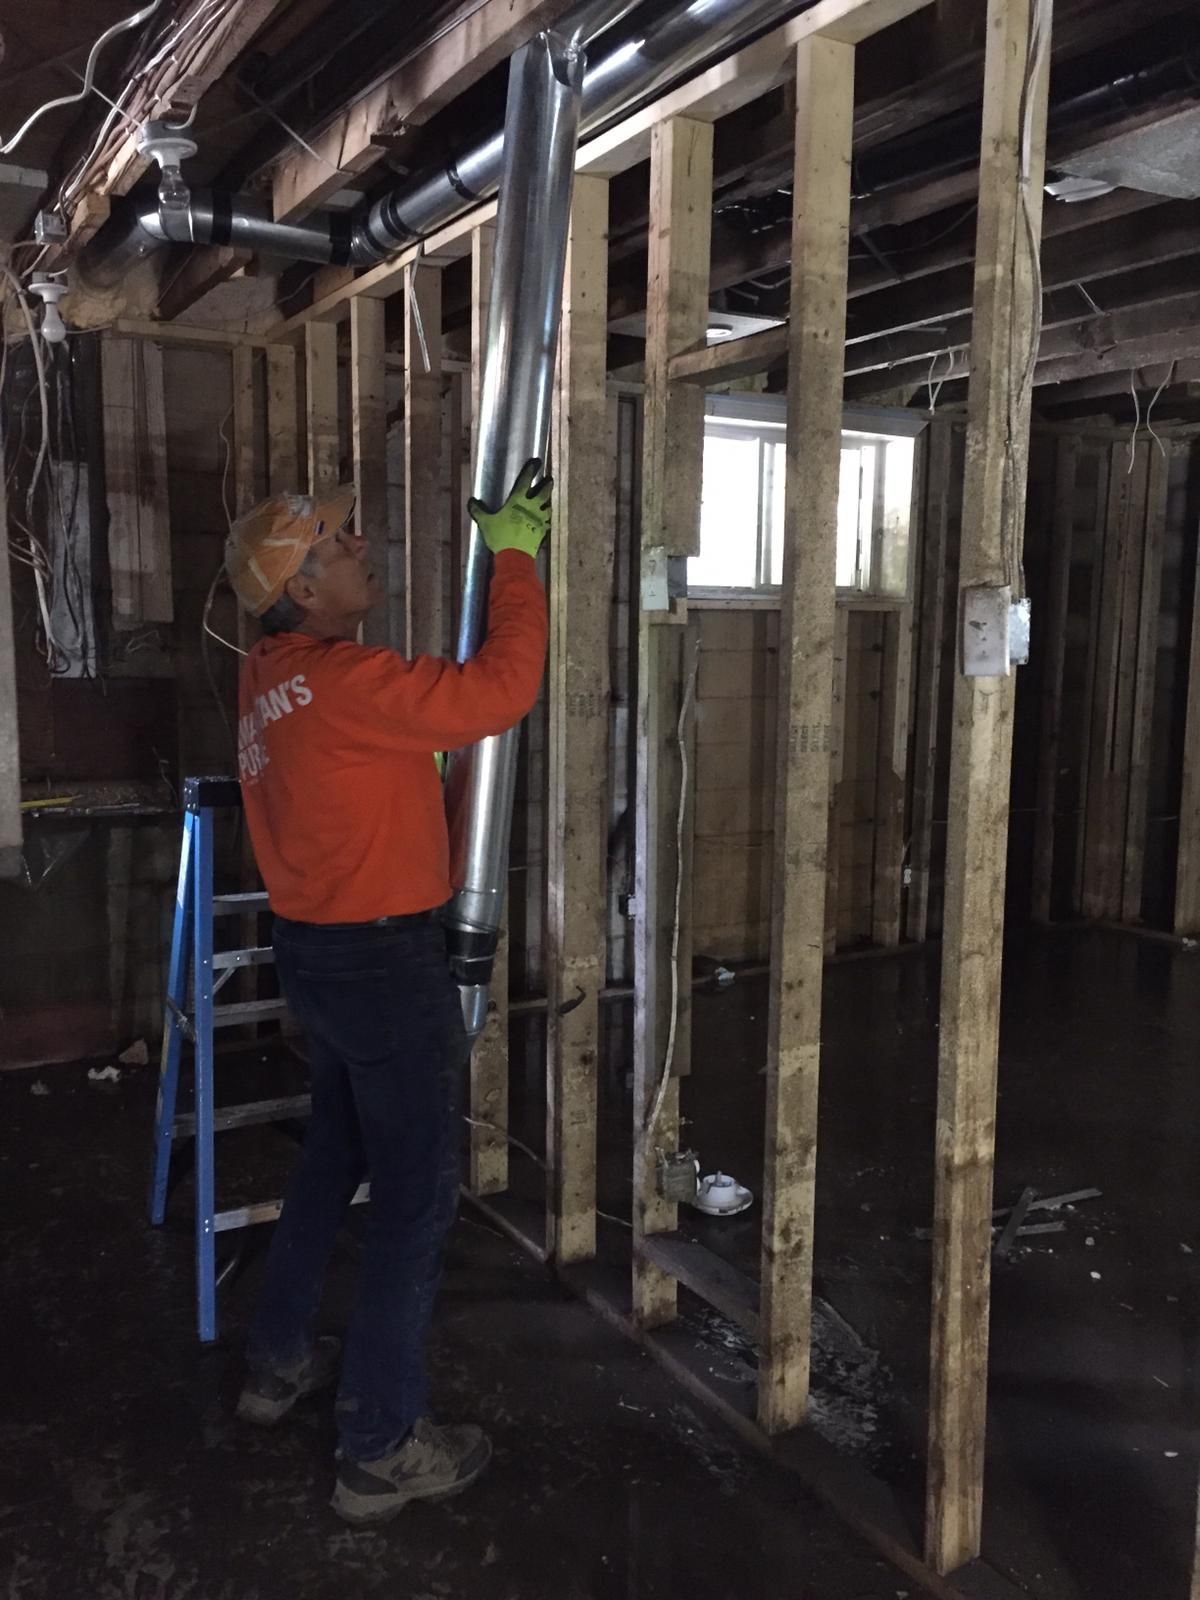 A Samaritan's Purse volunteer removes damaged duct work from a home in Renfrew County, ON.